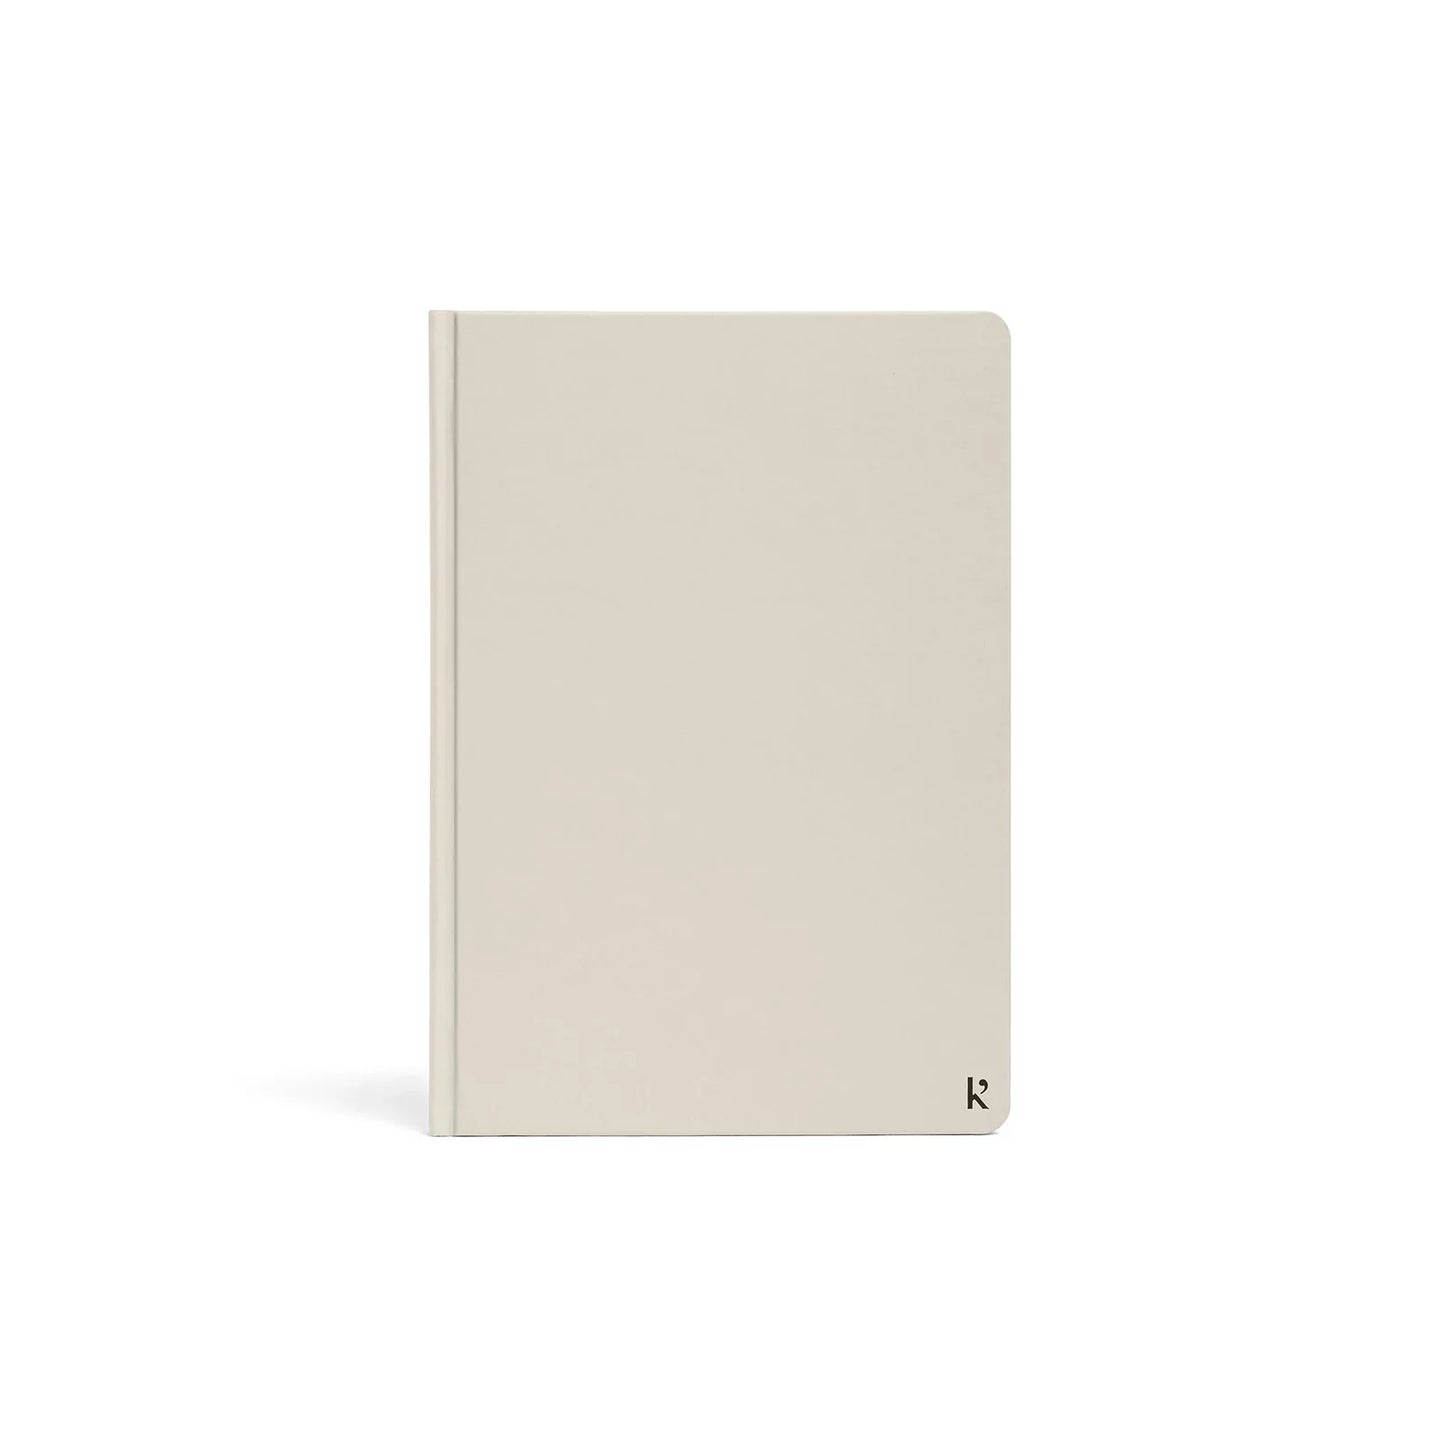 Karst Notebook A5 Hardcover - Stone (Dotted)